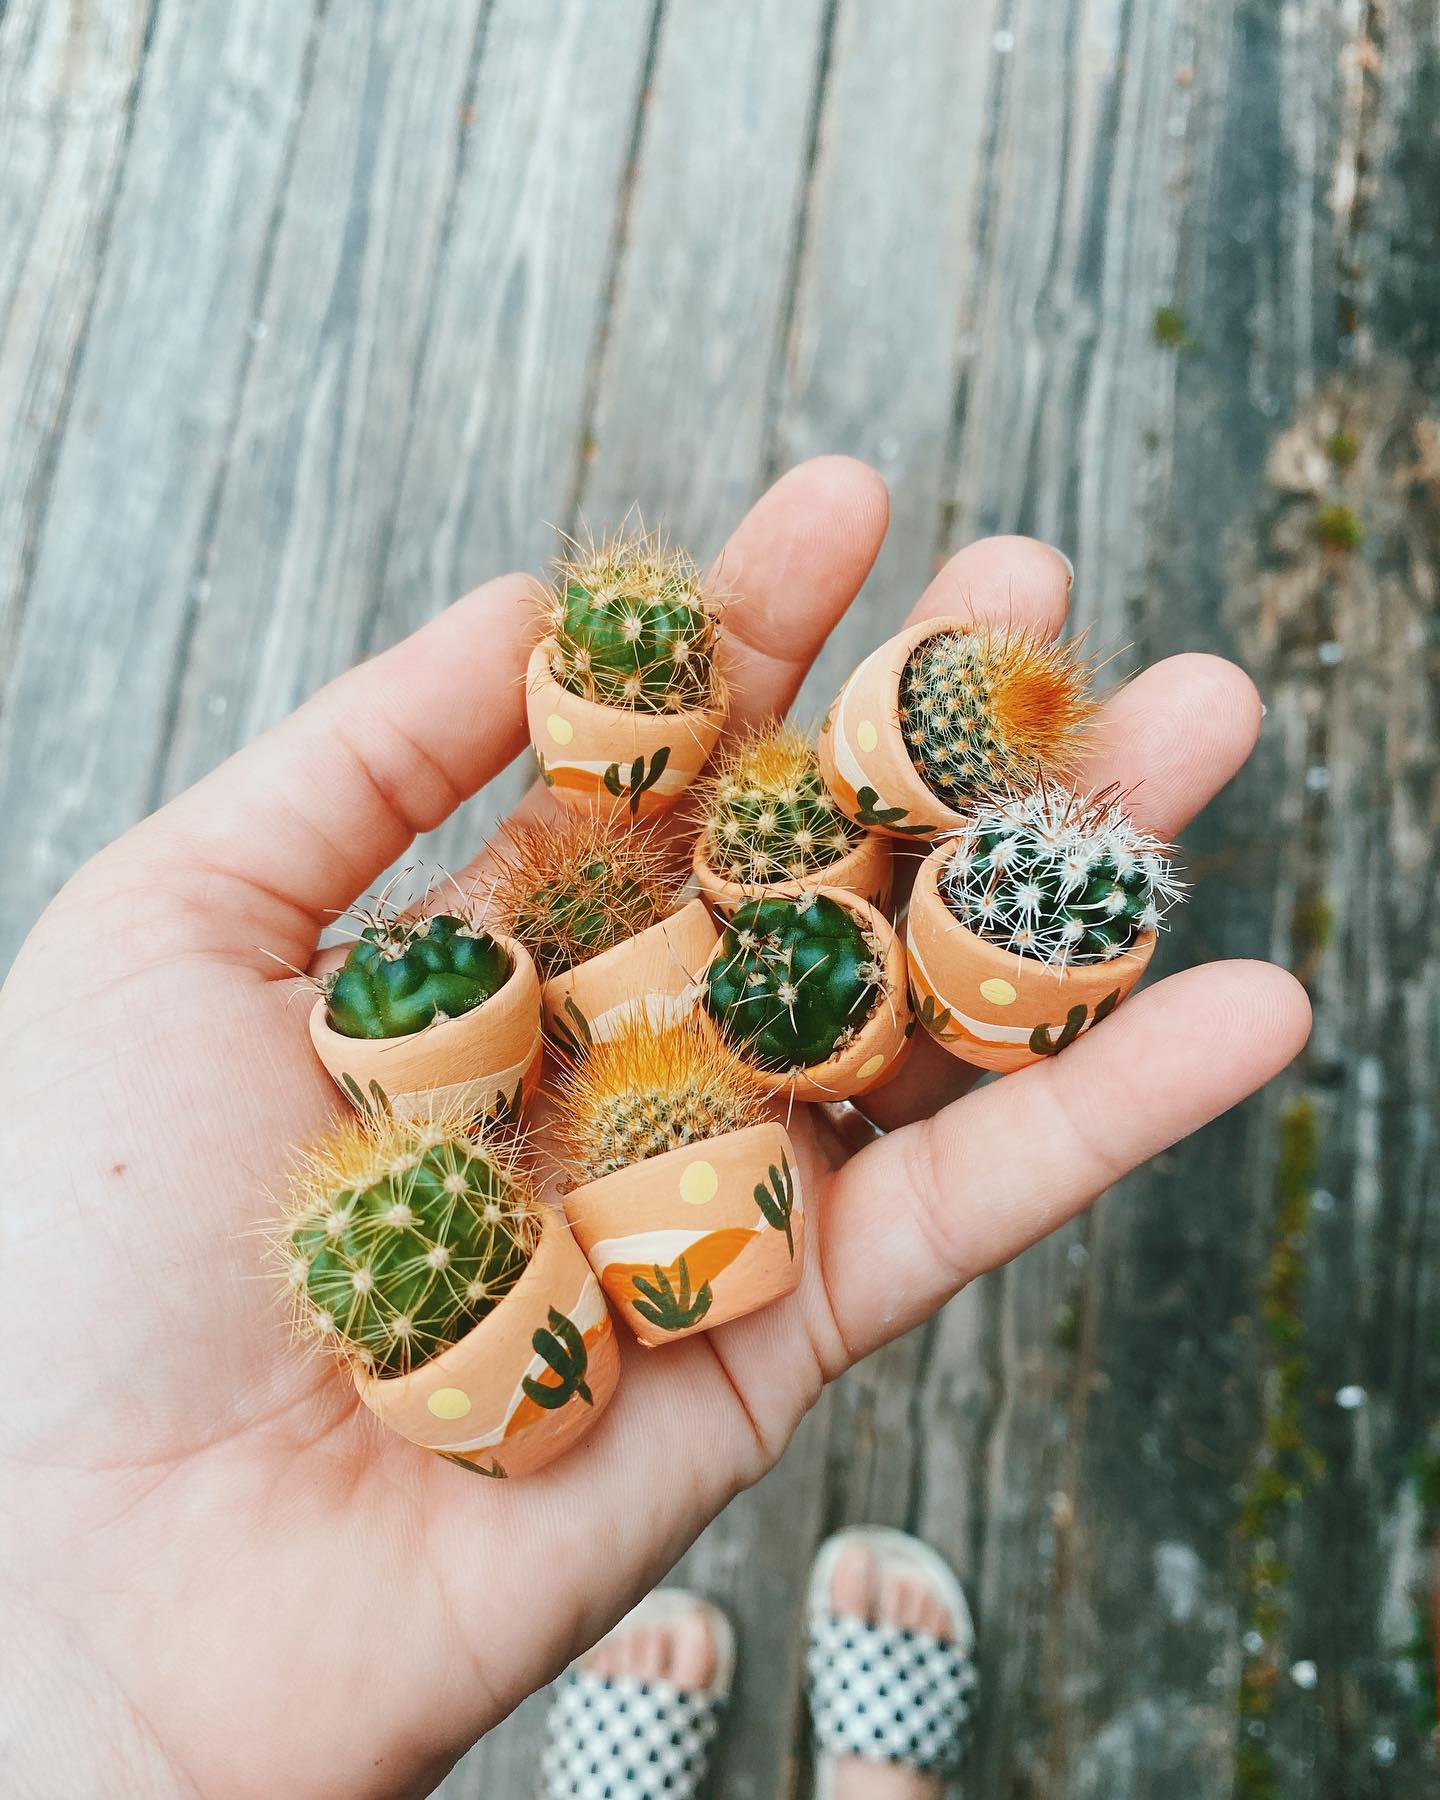 A cute, handmade mini planter made for air plants or succulents.   - handmade with concrete & hand painted. Includes airplant. o'berrys succulents